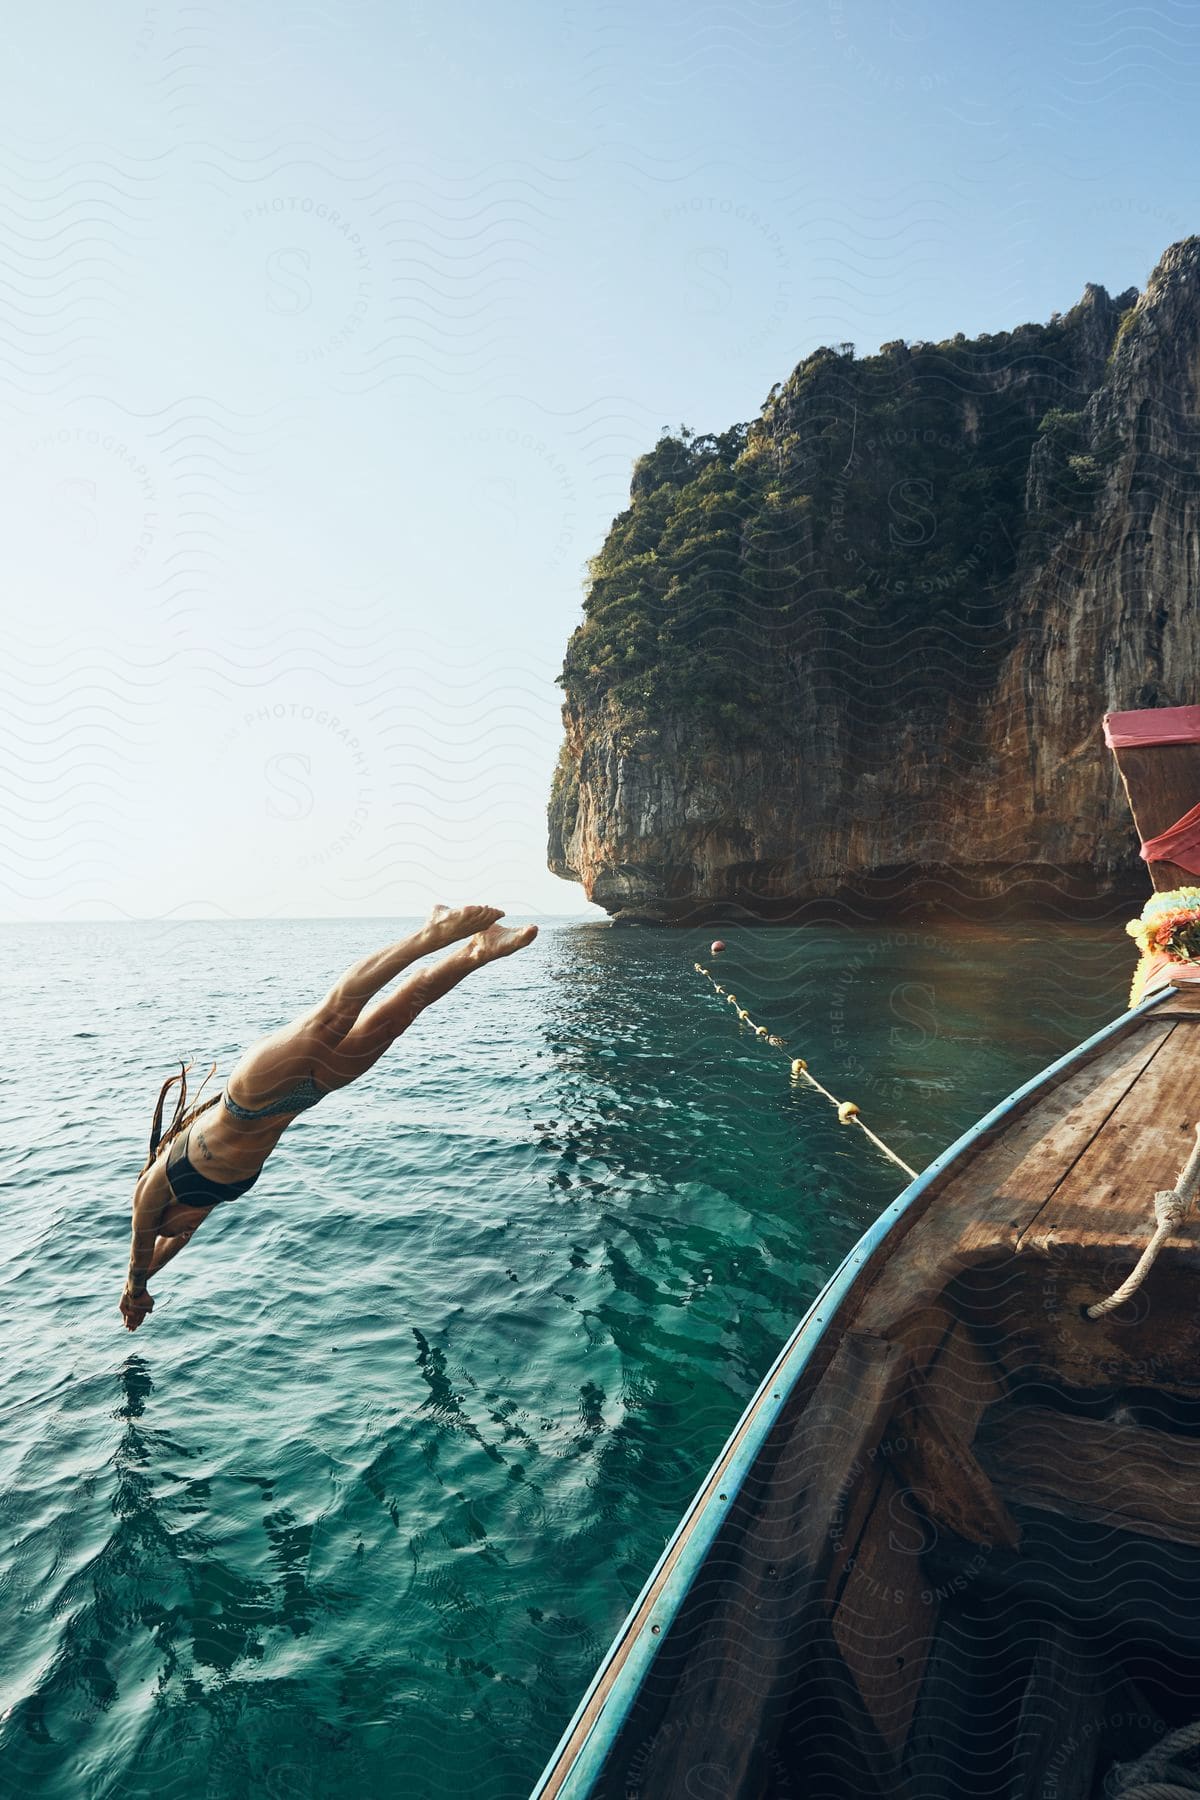 A woman in a bikini jumps into the sea from a boat in a bay.